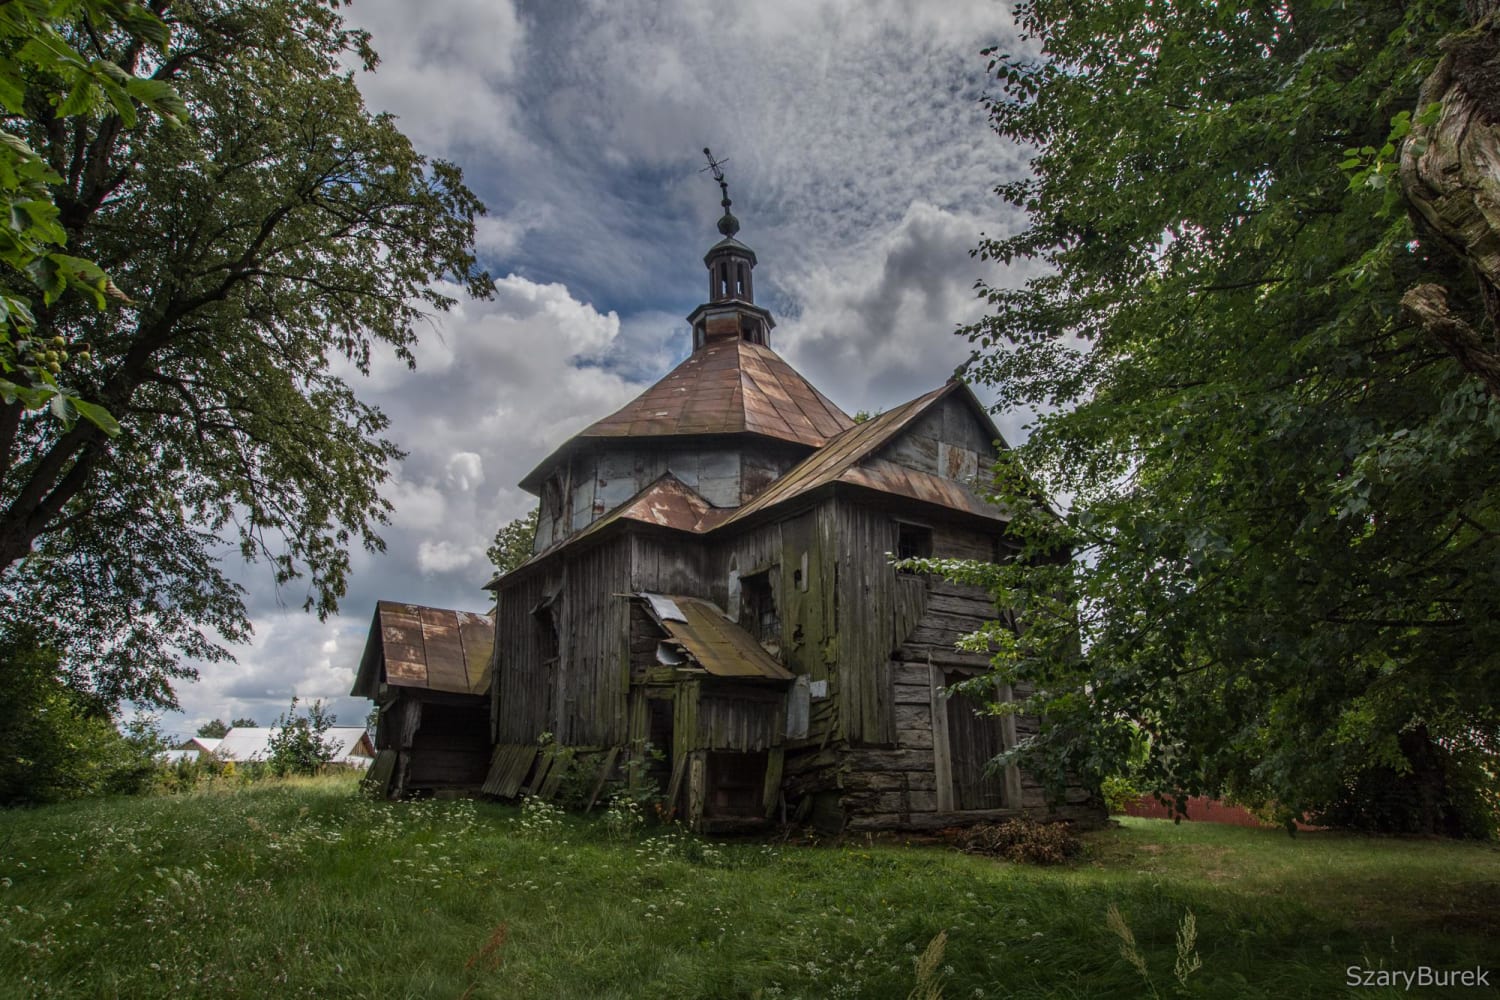 Abandoned church in Poland